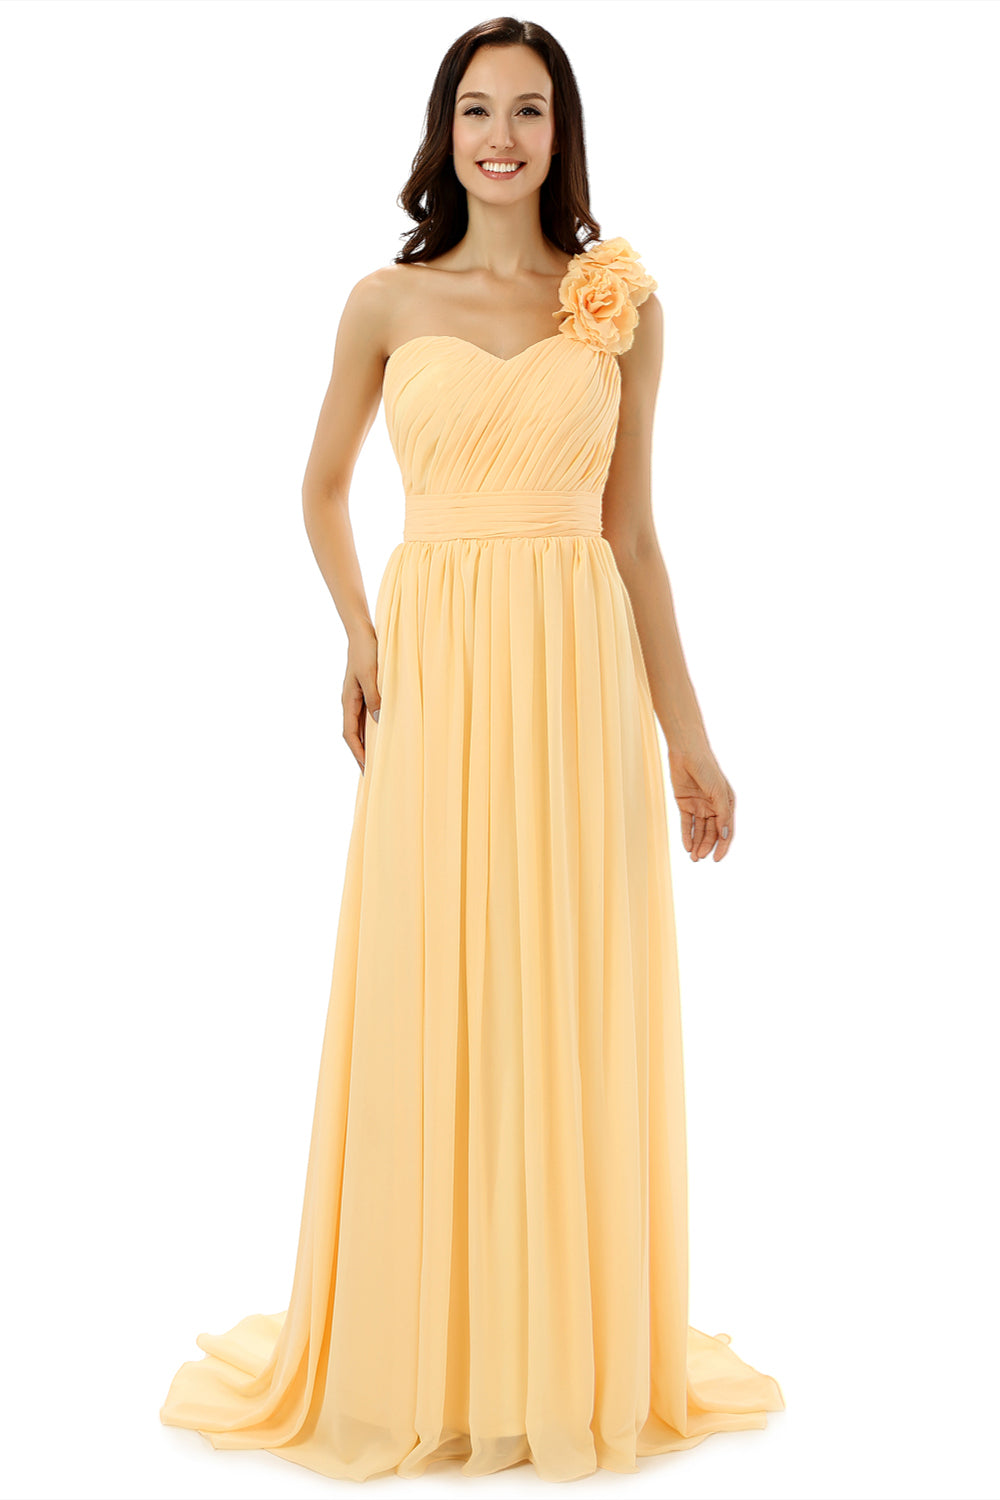 Yellow One Shoulder Chiffon With Pleats Flower Corset Bridesmaid Dresses outfit, Elegant Wedding